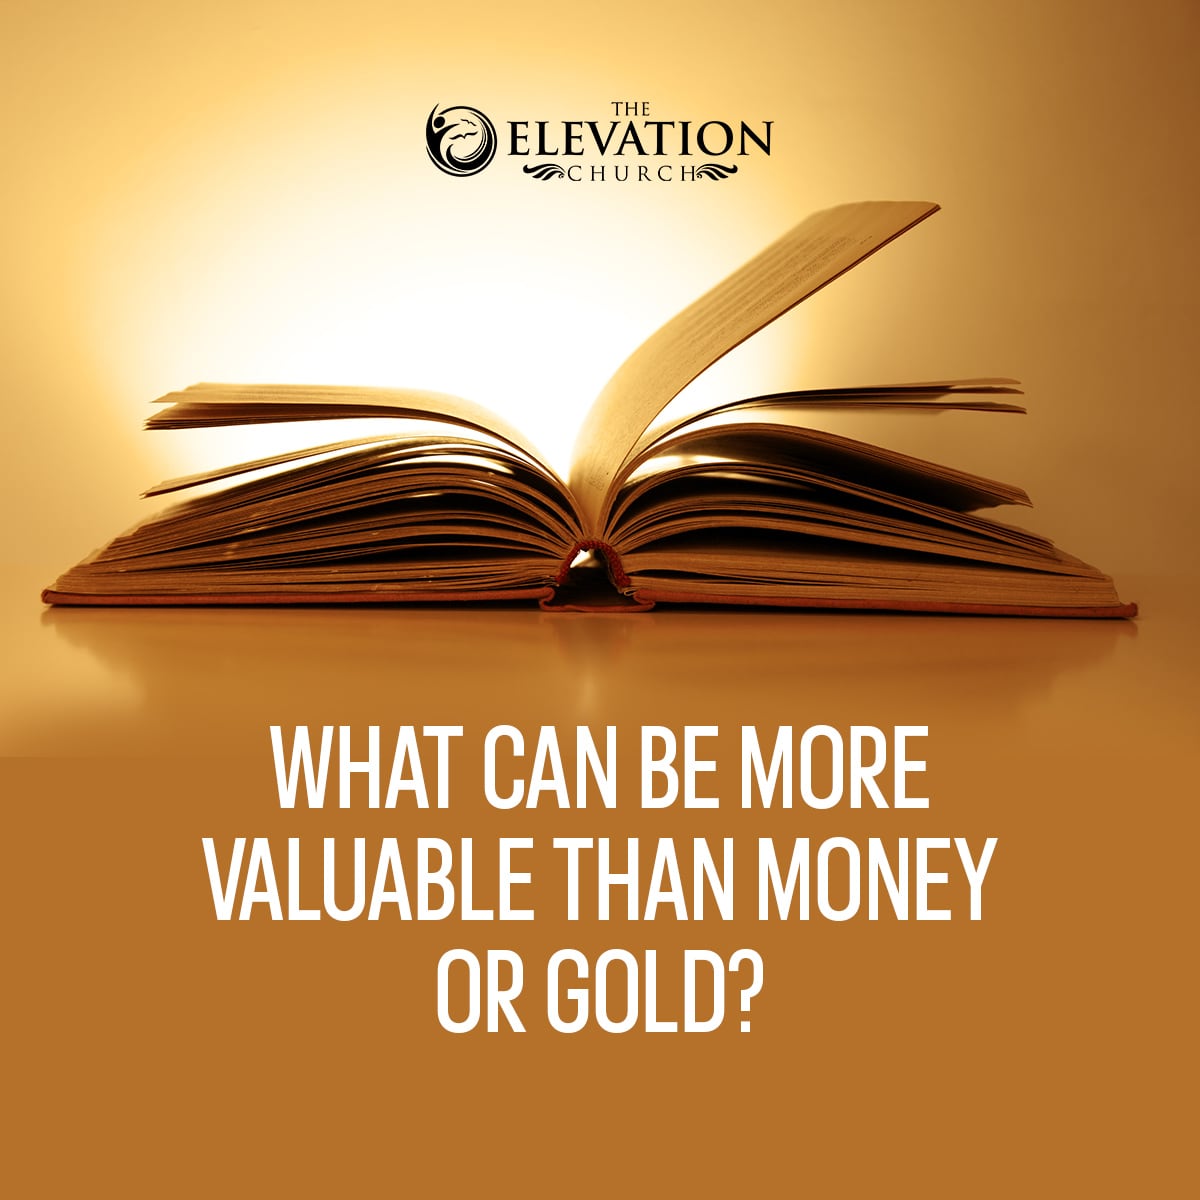 What can be more valuable than money or gold?